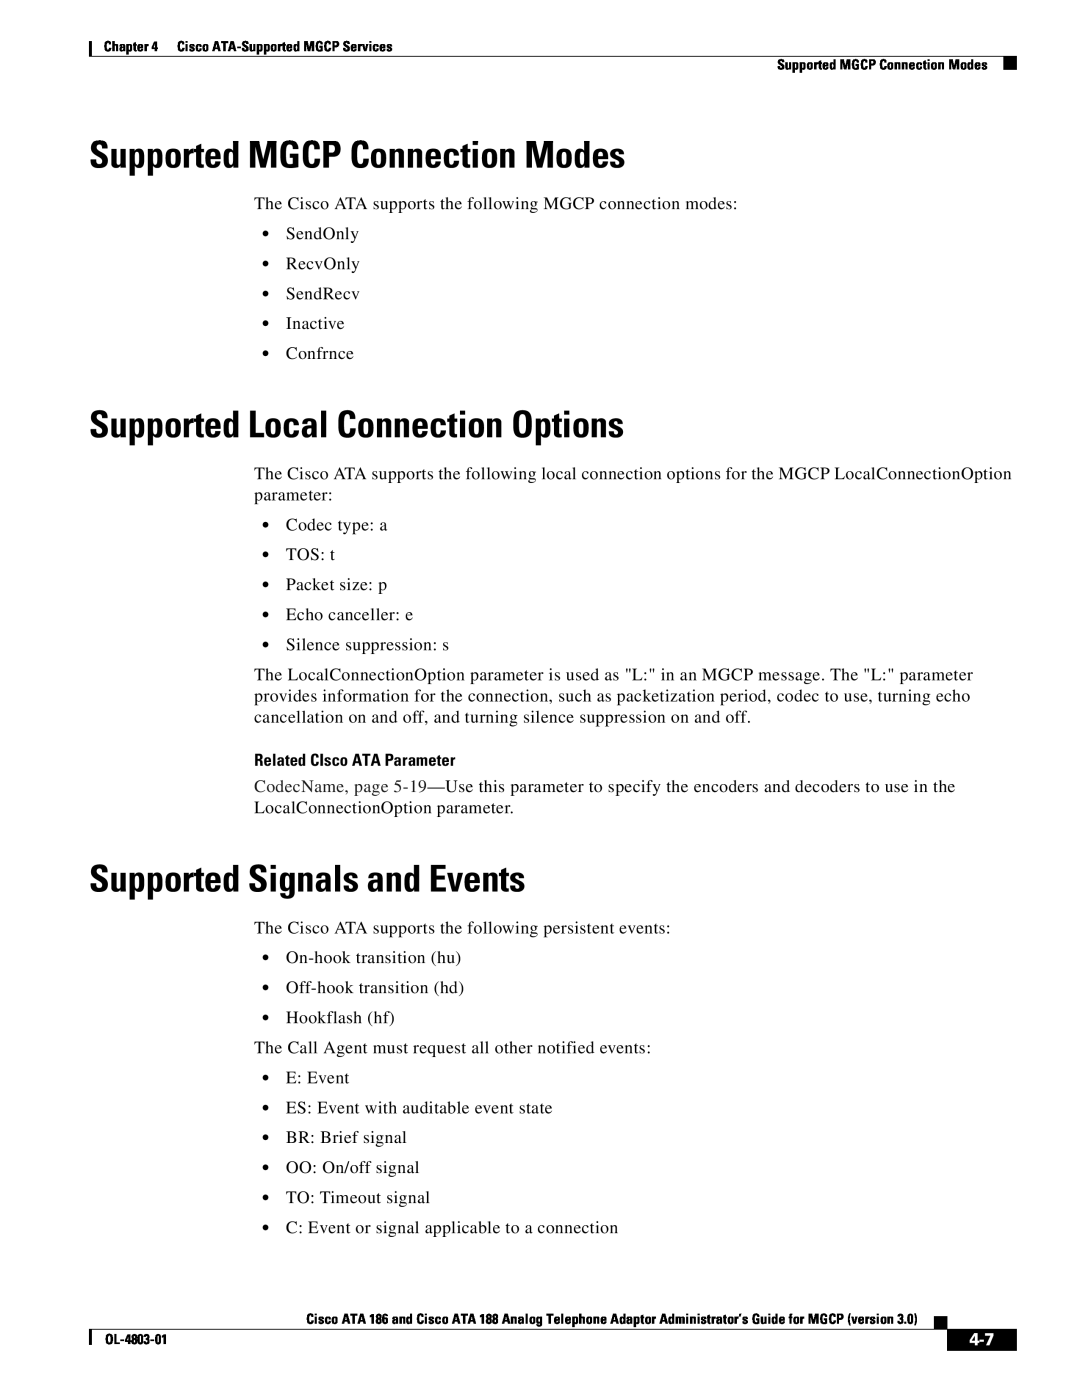 Cisco Systems ATA 188 Supported MGCP Connection Modes, Supported Local Connection Options, Supported Signals and Events 